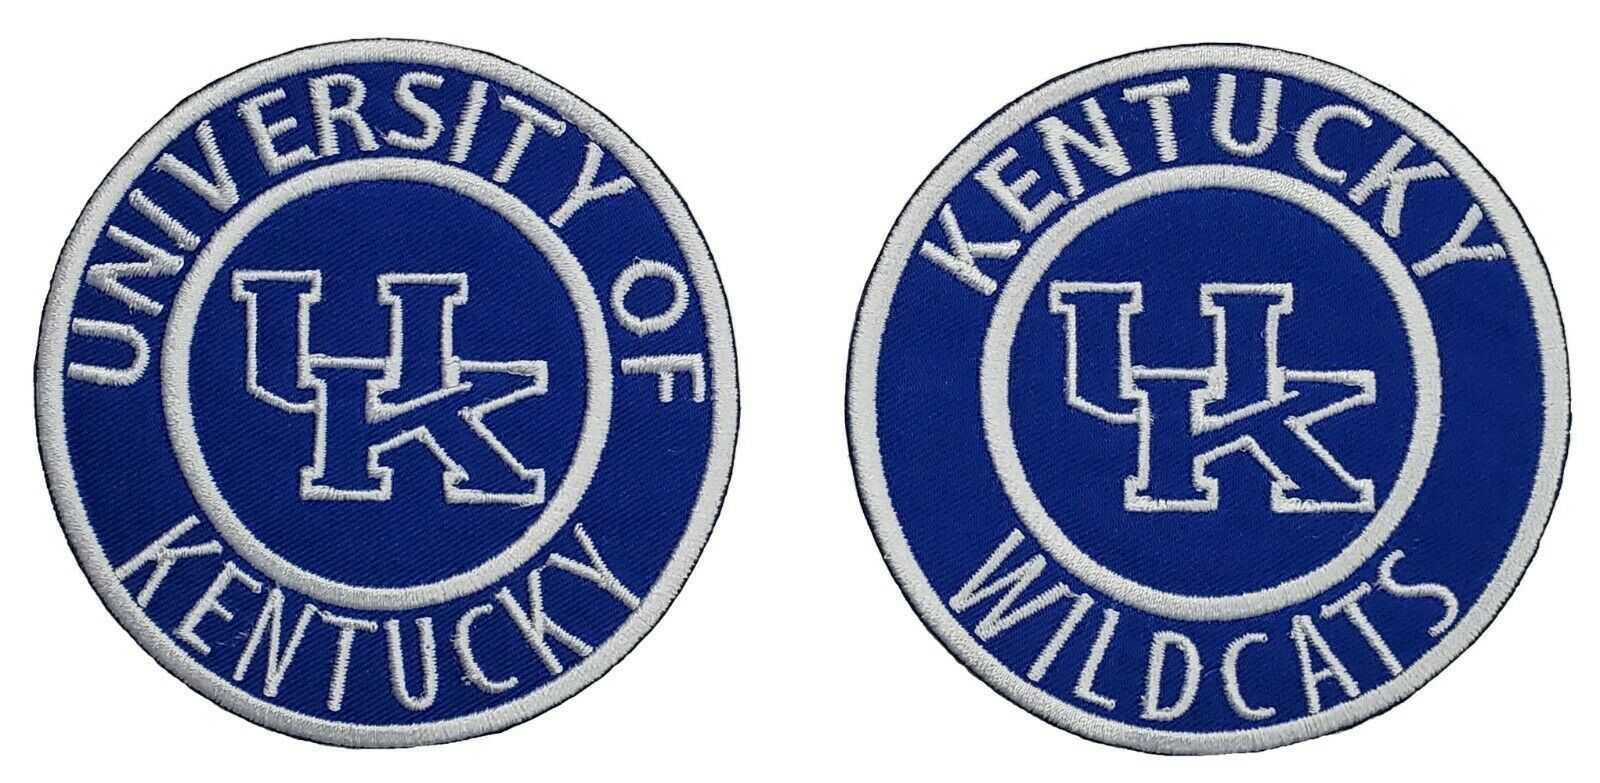 University of Kentucky Wildcats NCAA Football Embroidered Applique Iron On Patch - £6.70 GBP - £8.28 GBP